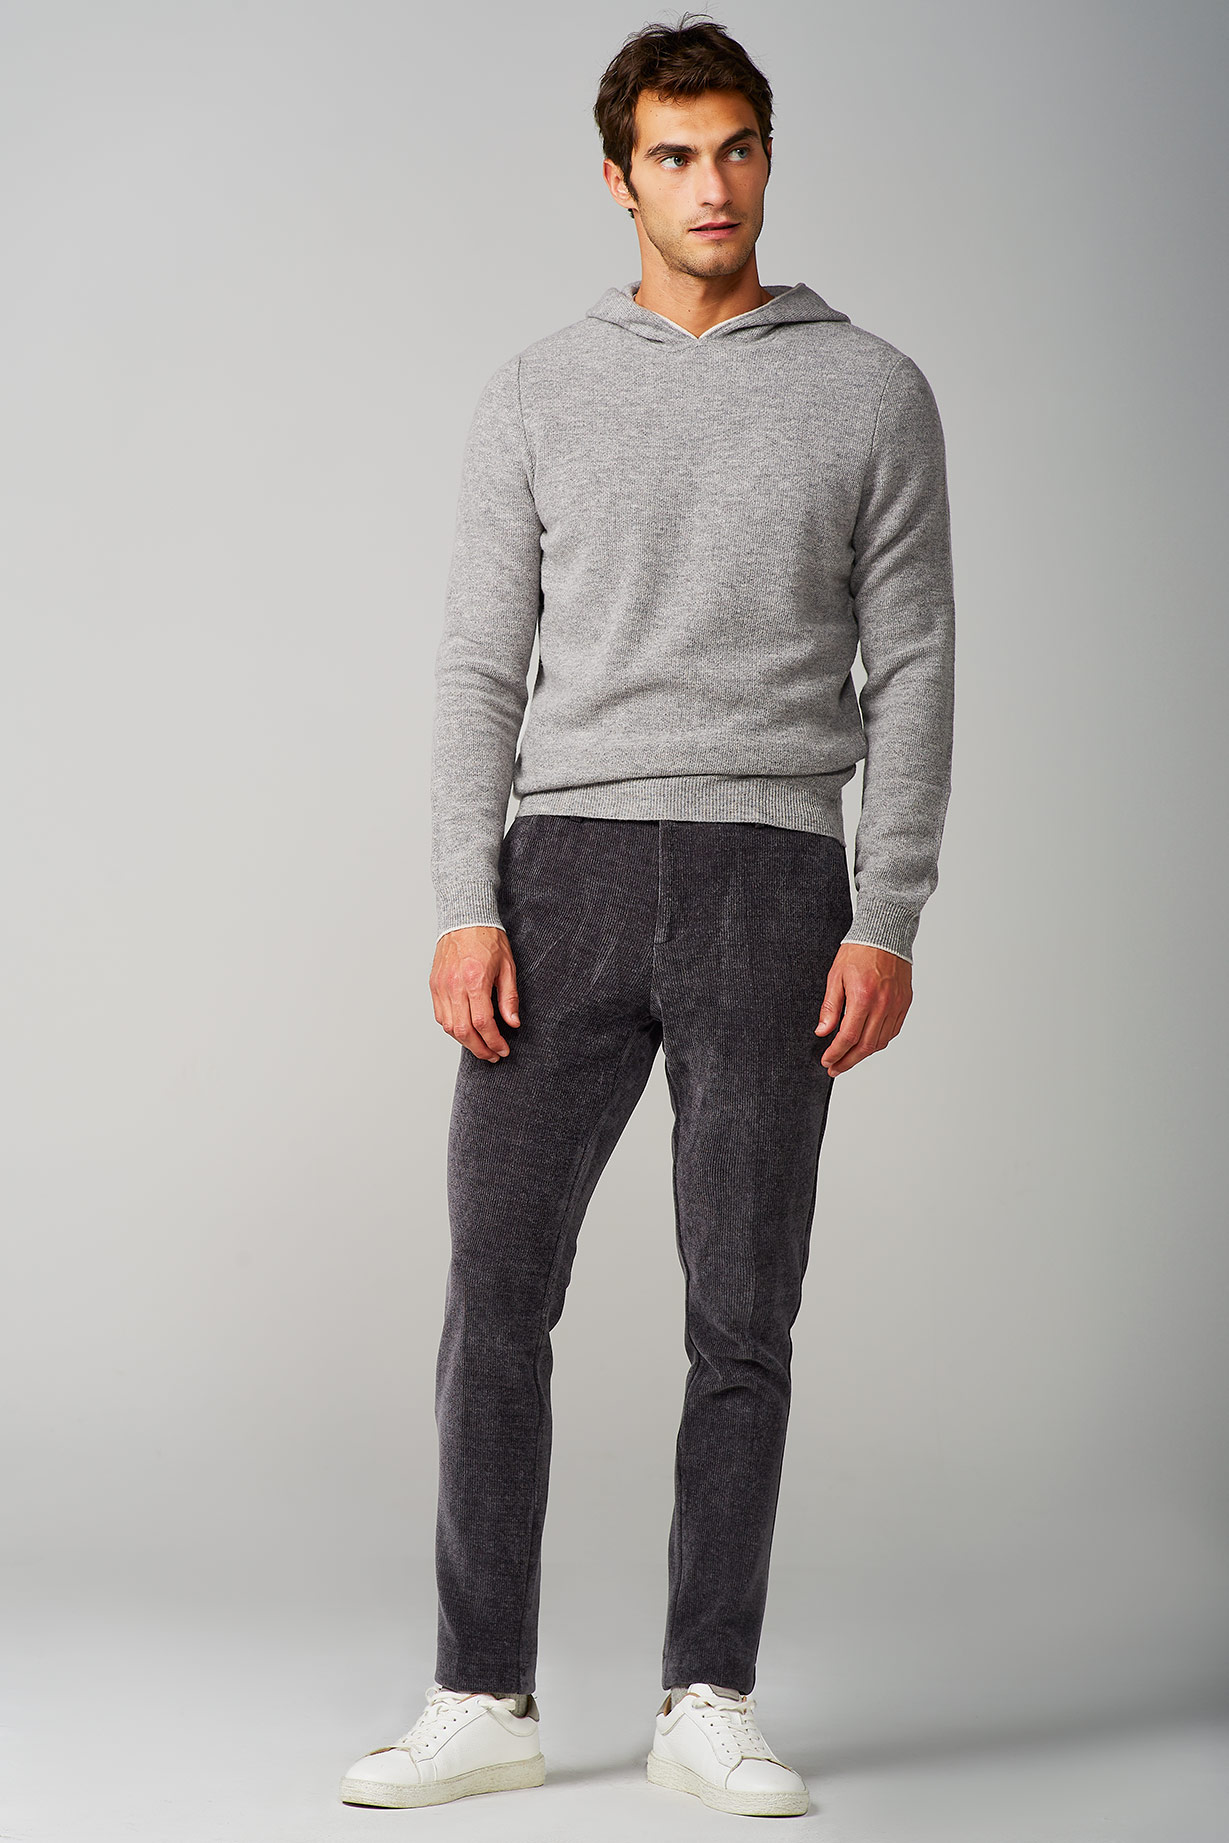 GREY CORDUROY JERSEY LACE UP TROUSER